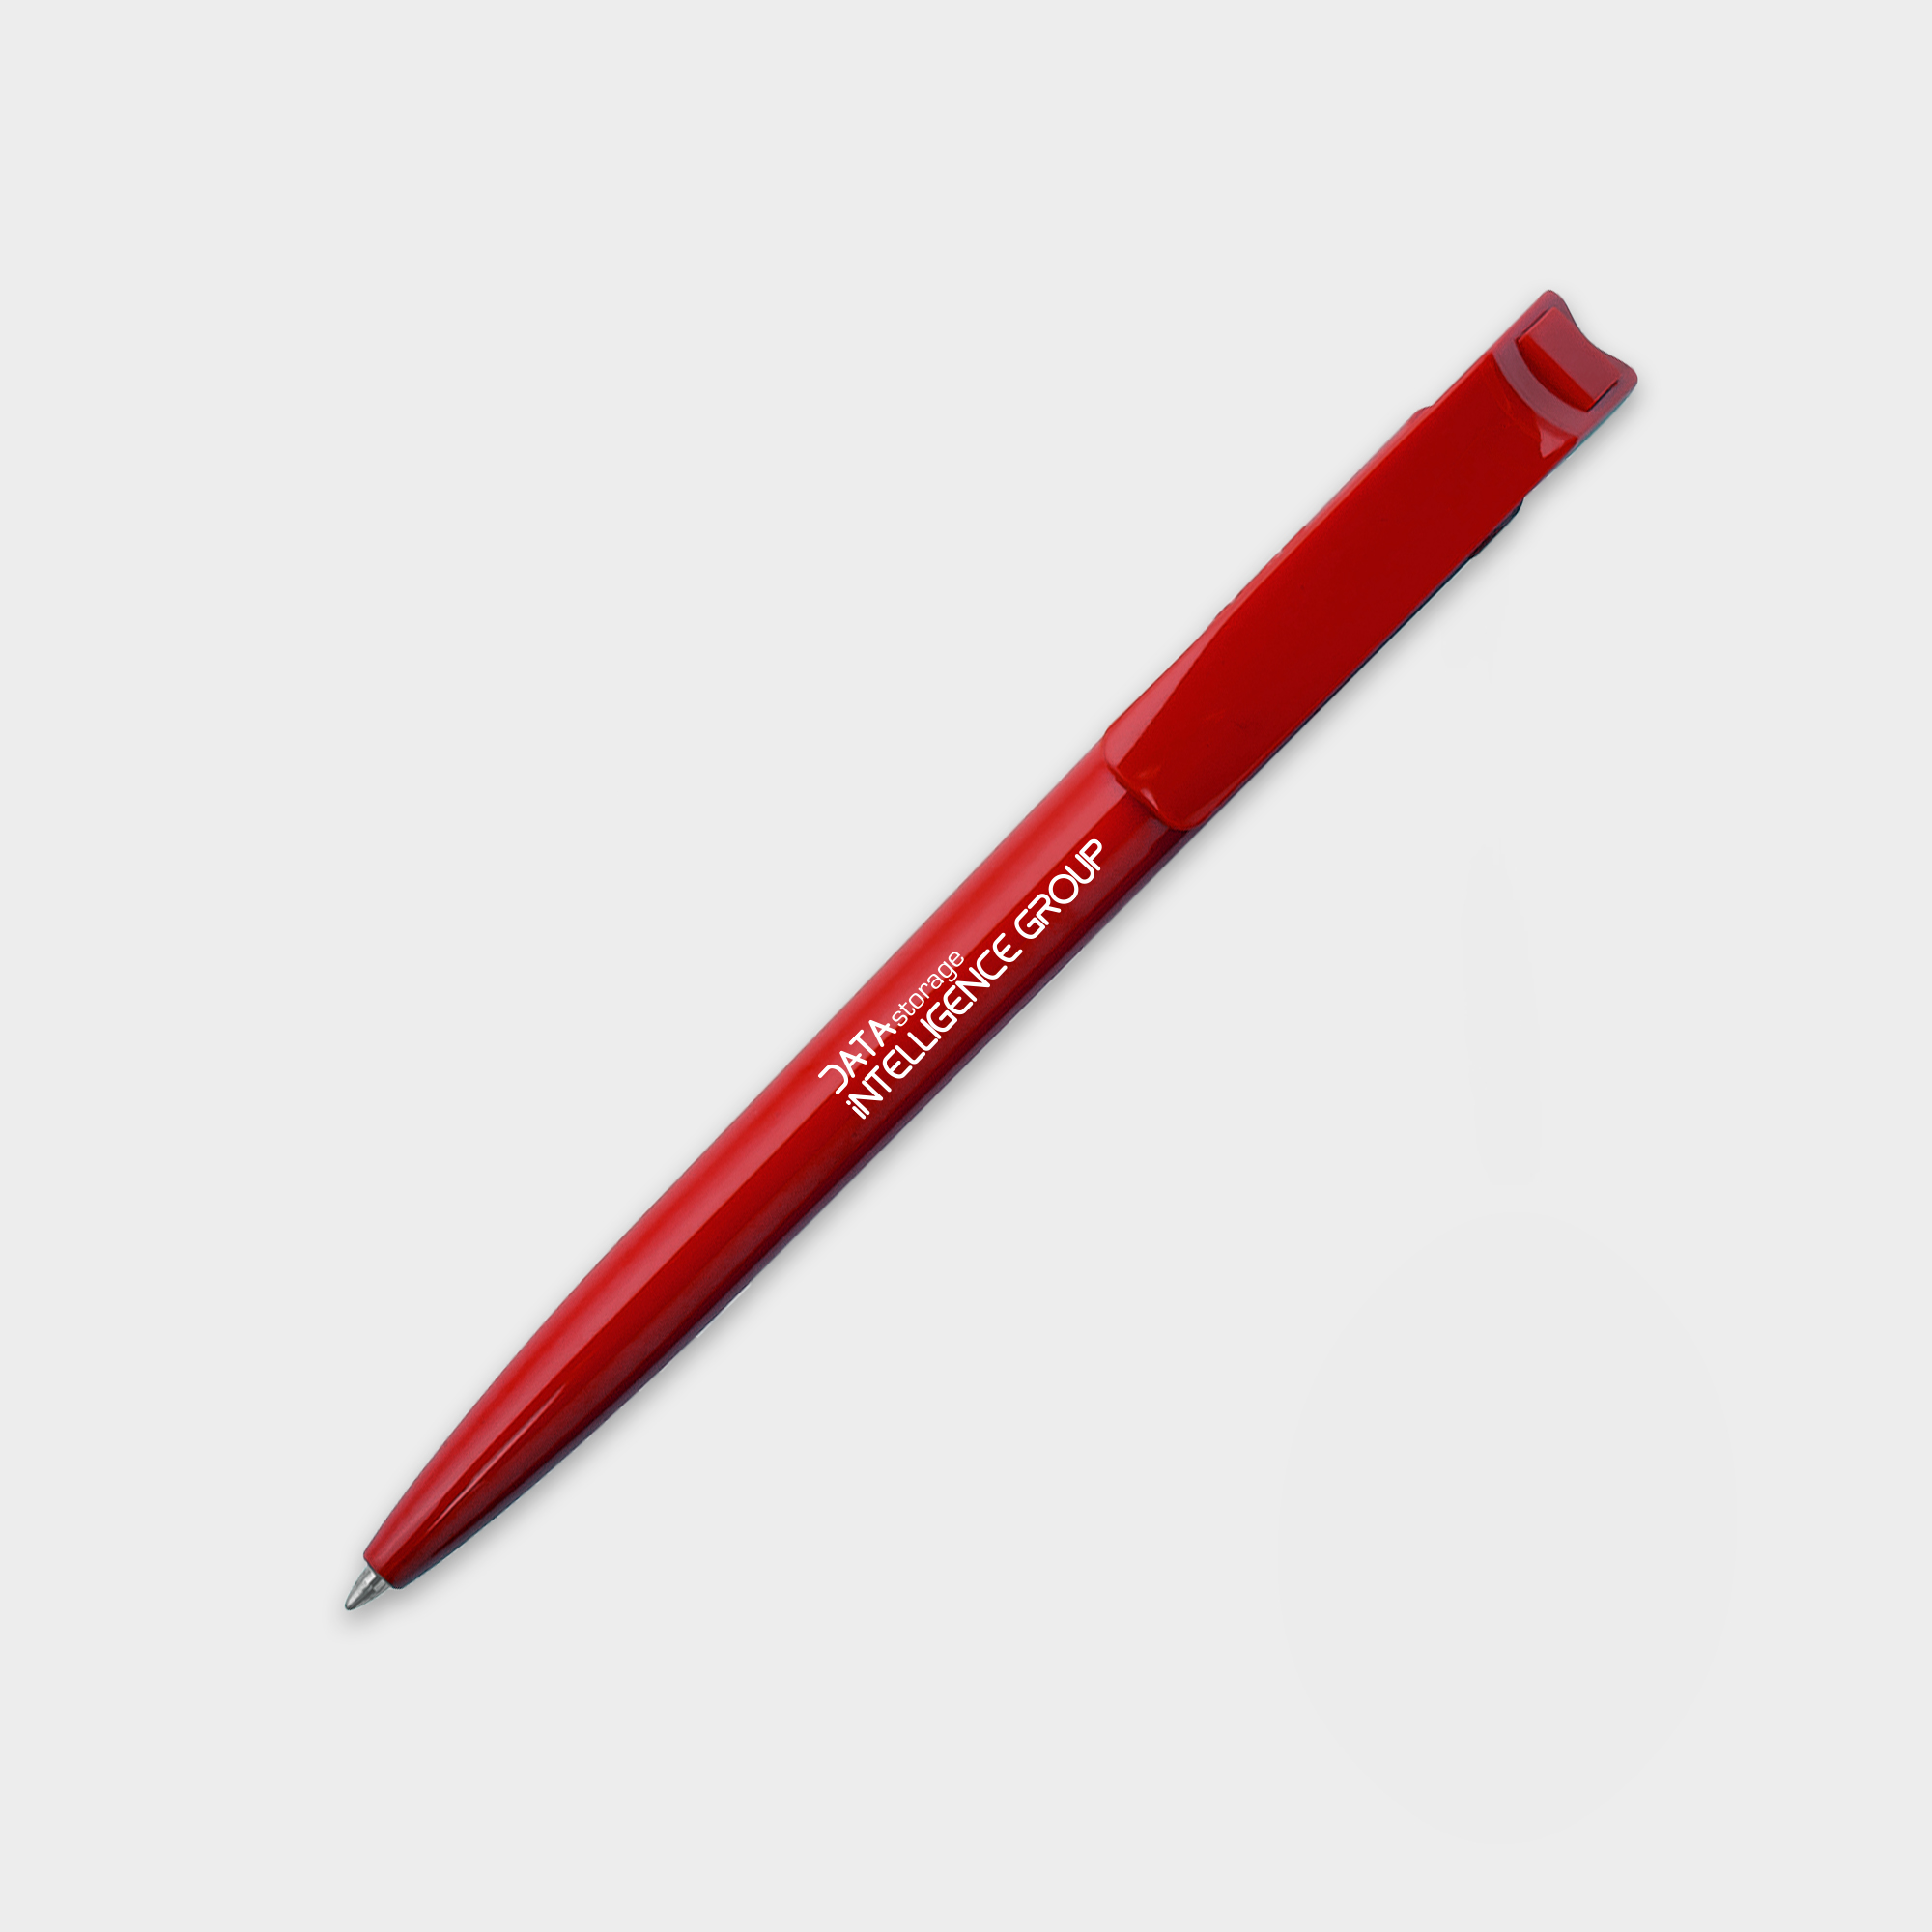 The Green & Good Litani Pen. An eco-friendly and high-quality pen made from recycled plastic bottles (rPET) with black ink refills and a solid colour body. Made in the EU and available in a variety of colours. Red